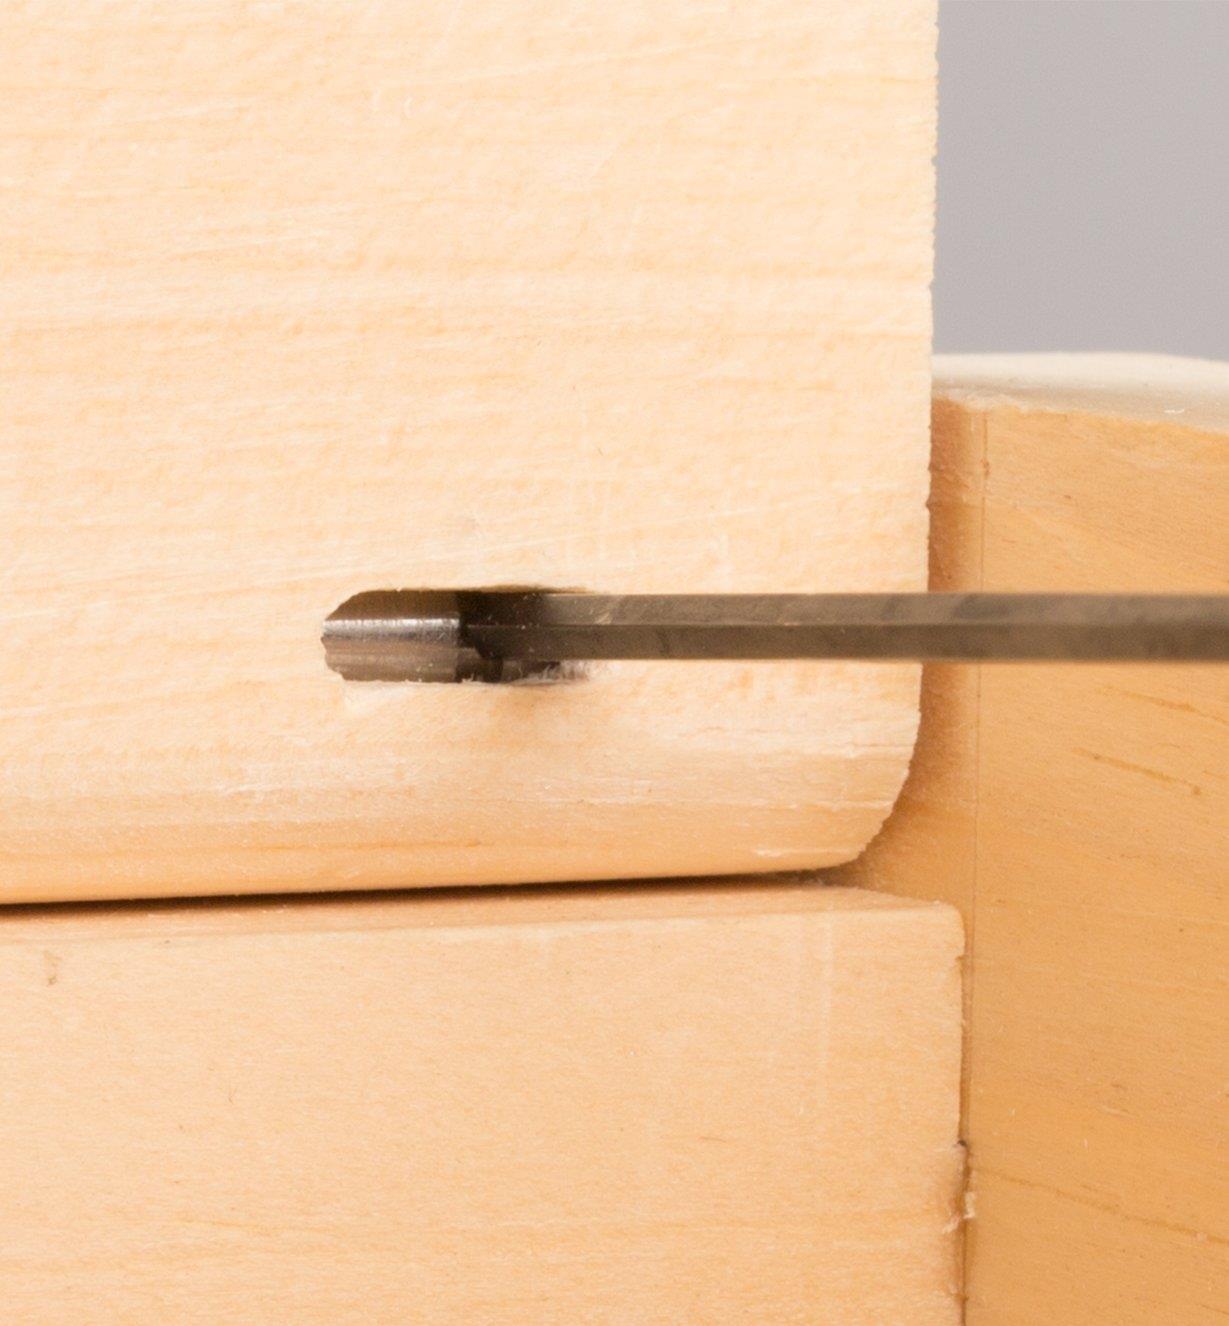 Pushing back the installed hinge pin with a narrow tool through a groove in the lid to remove the box lid